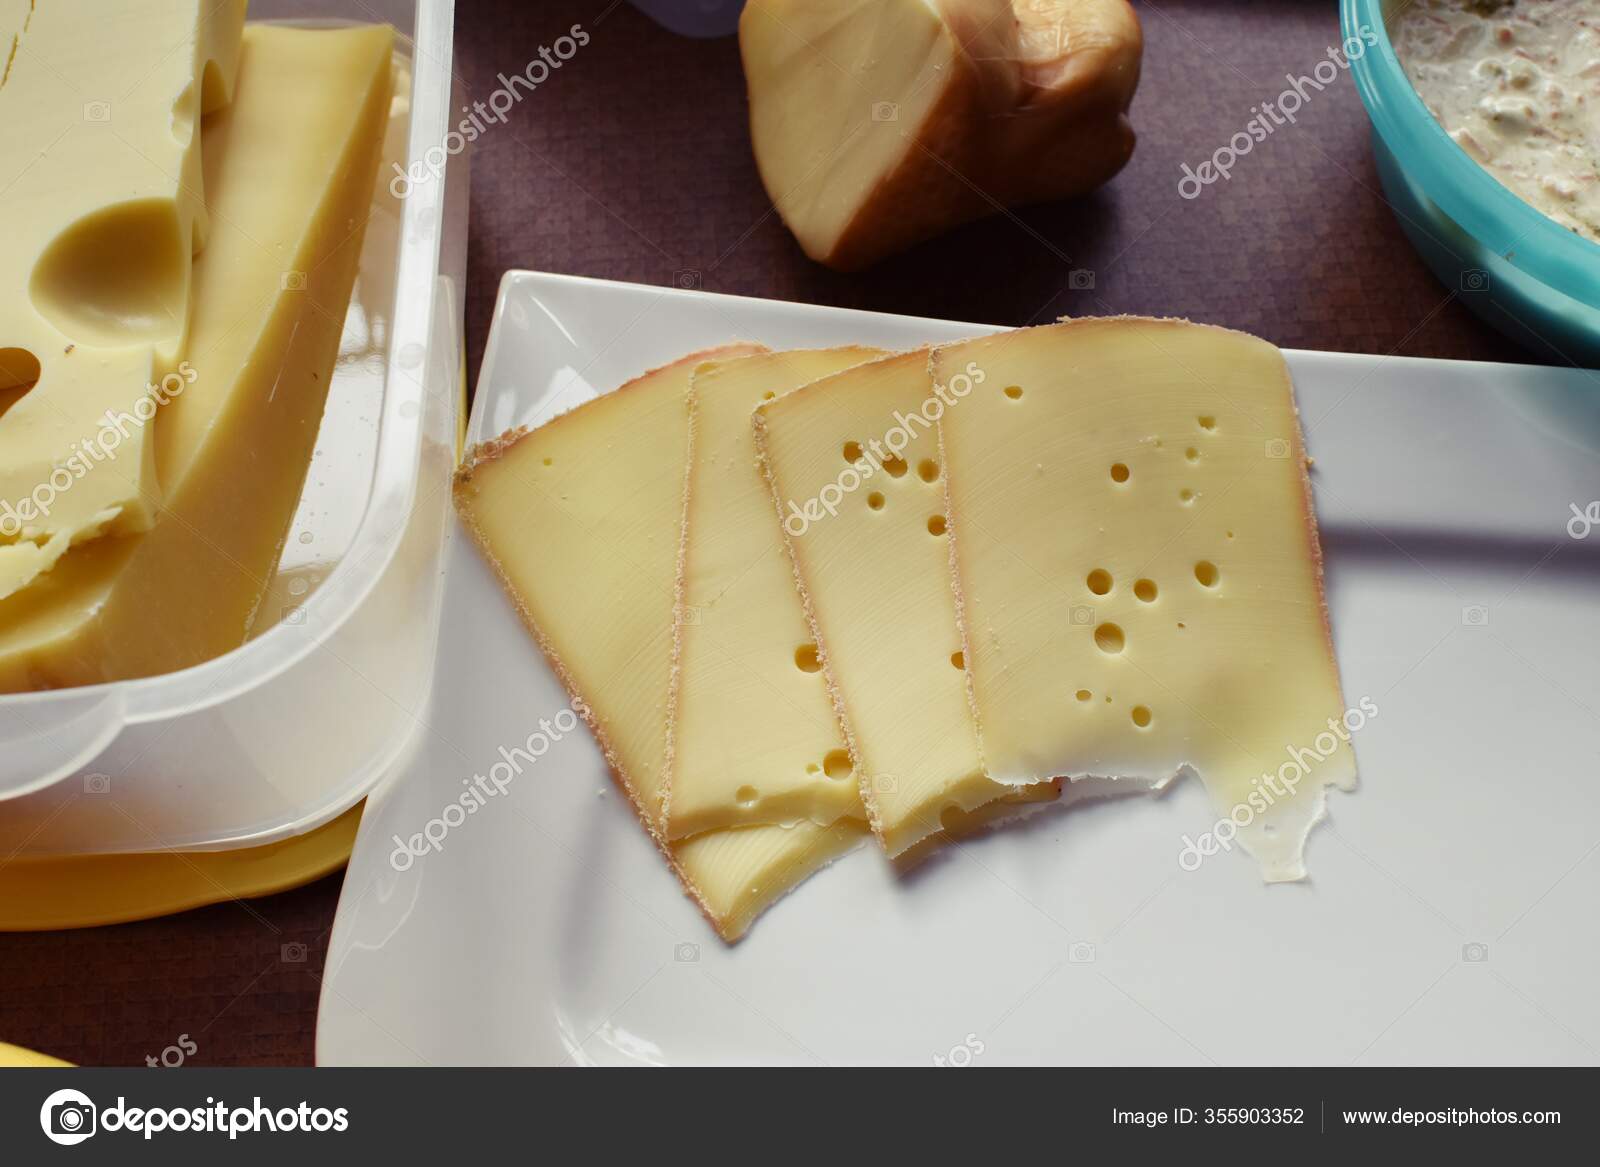 Cheese types of Different Types